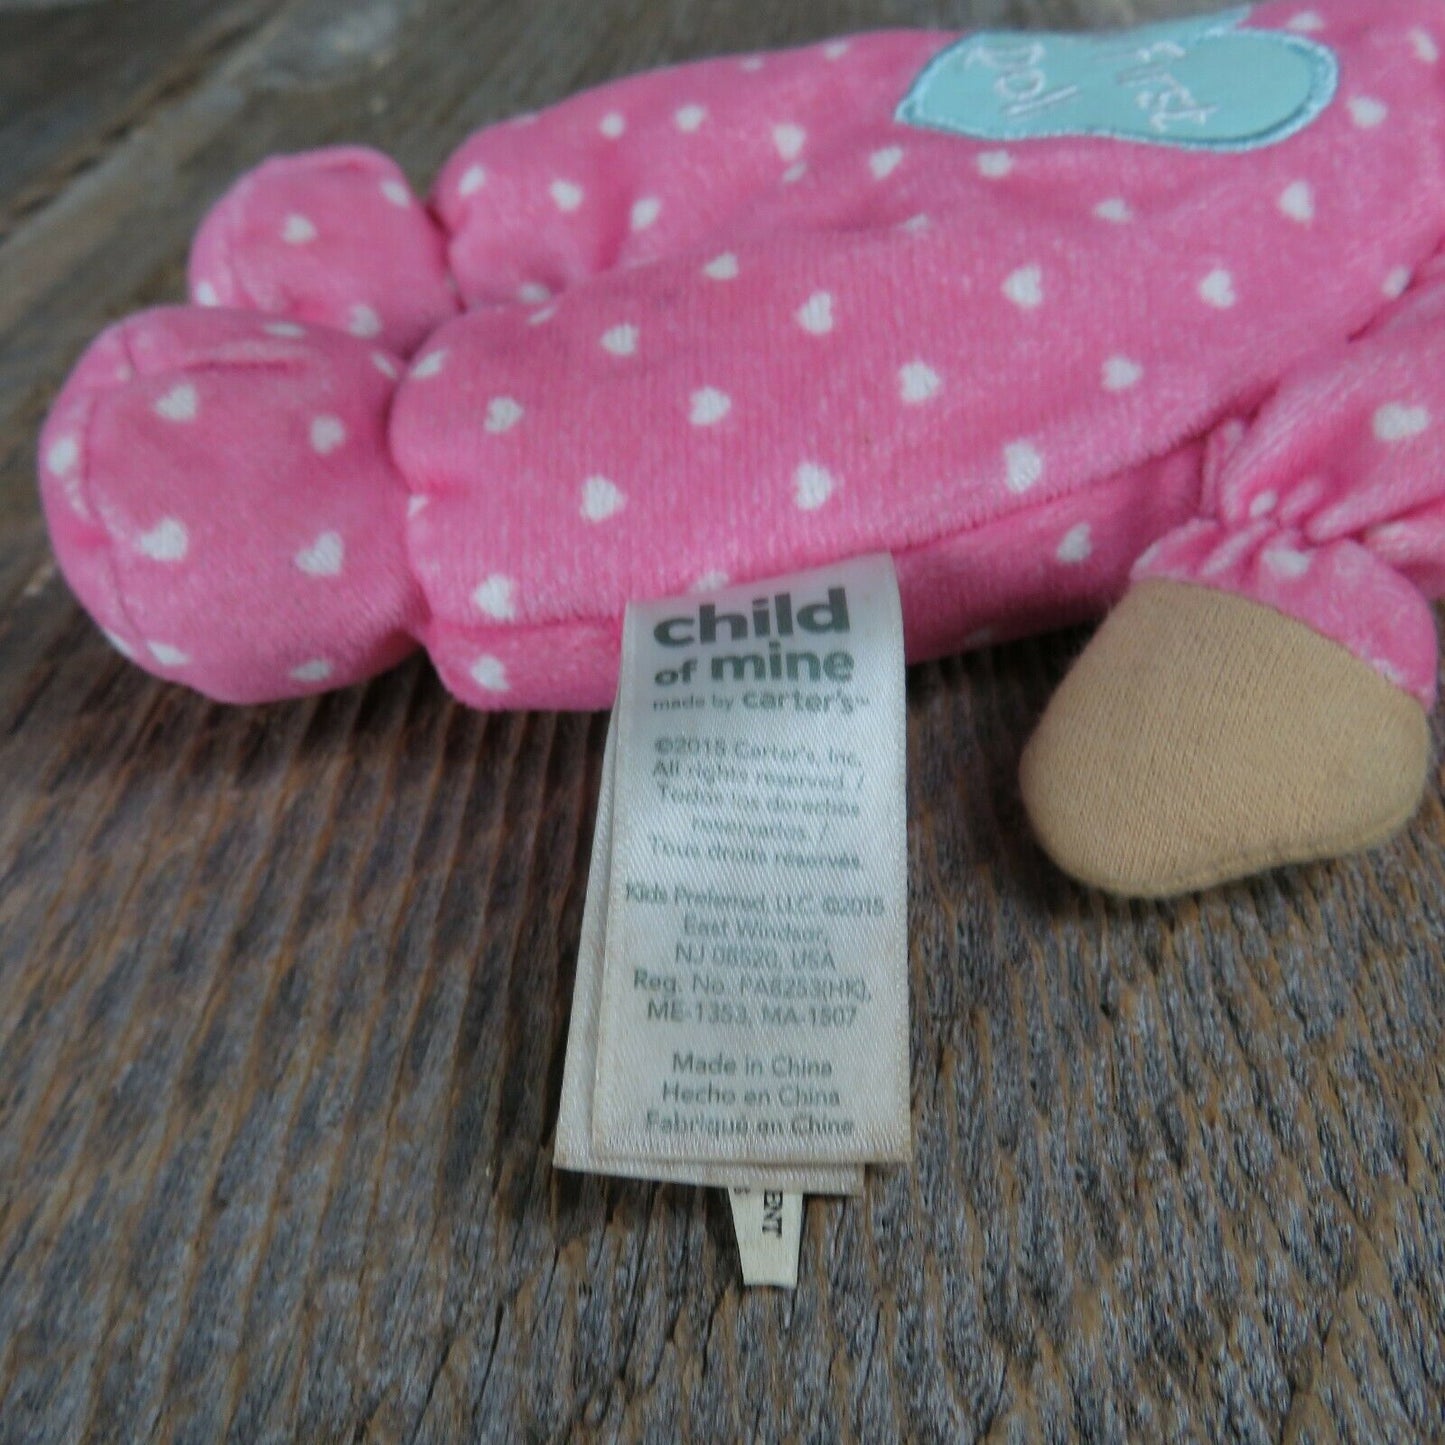 MY FIRST DOLL Rattle Crinkle Plush Pink Carters Child of Mine Stuffed Toy Dark